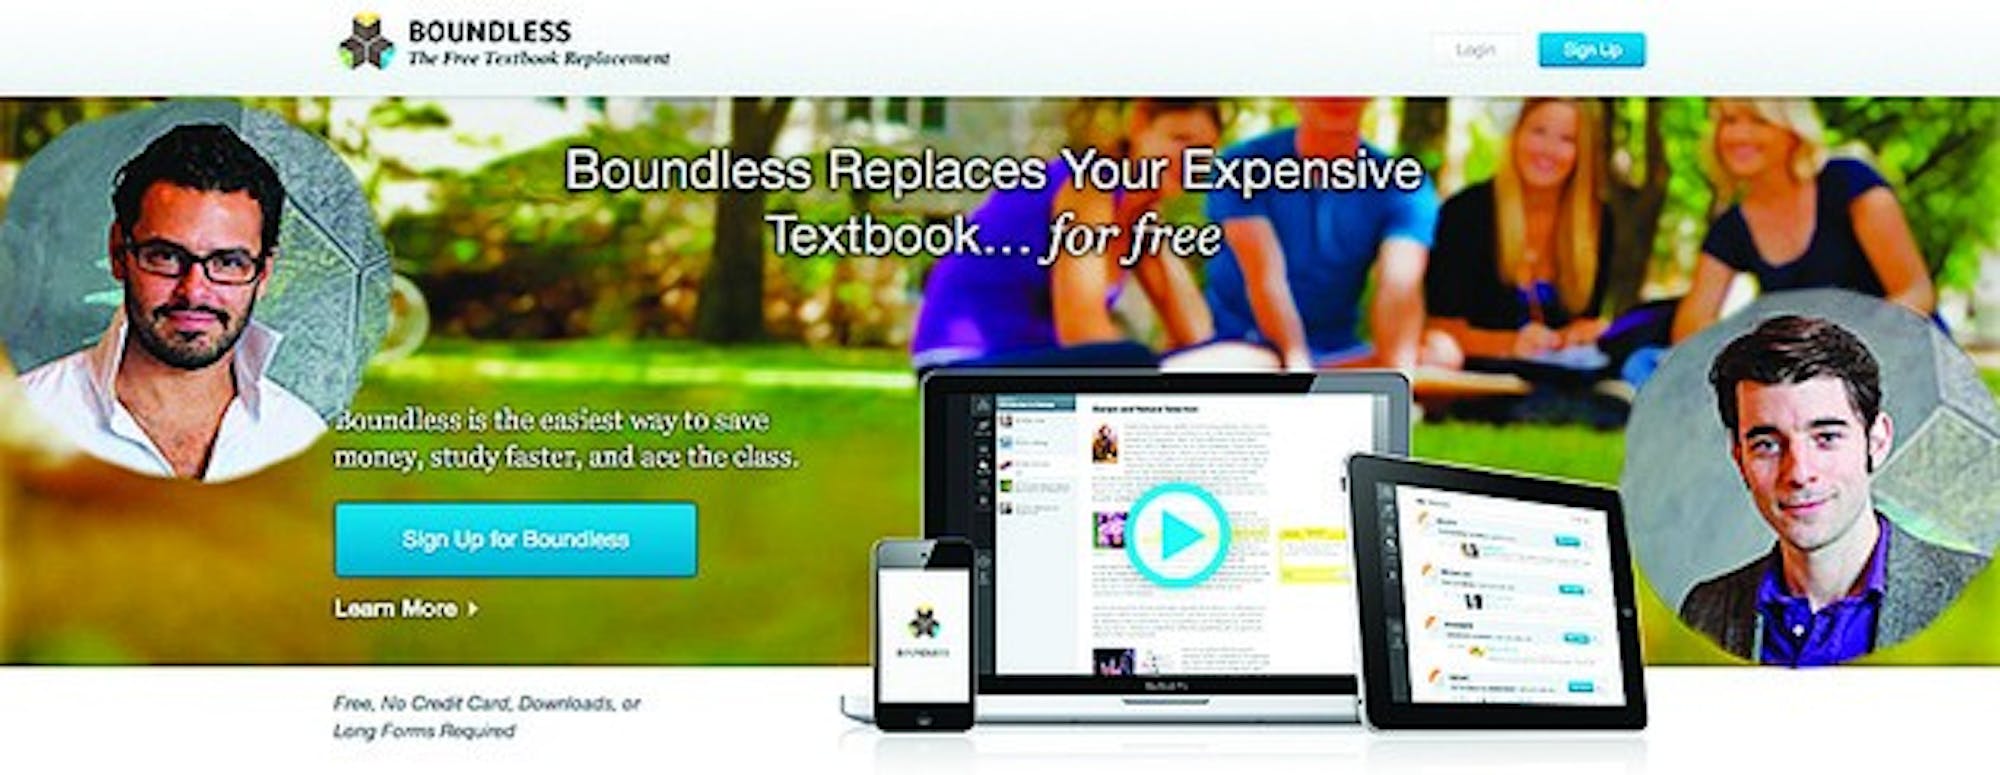 Ariel Diaz '02 Th'04 created a startup called Boundless, which offers students free materials in textbook form.